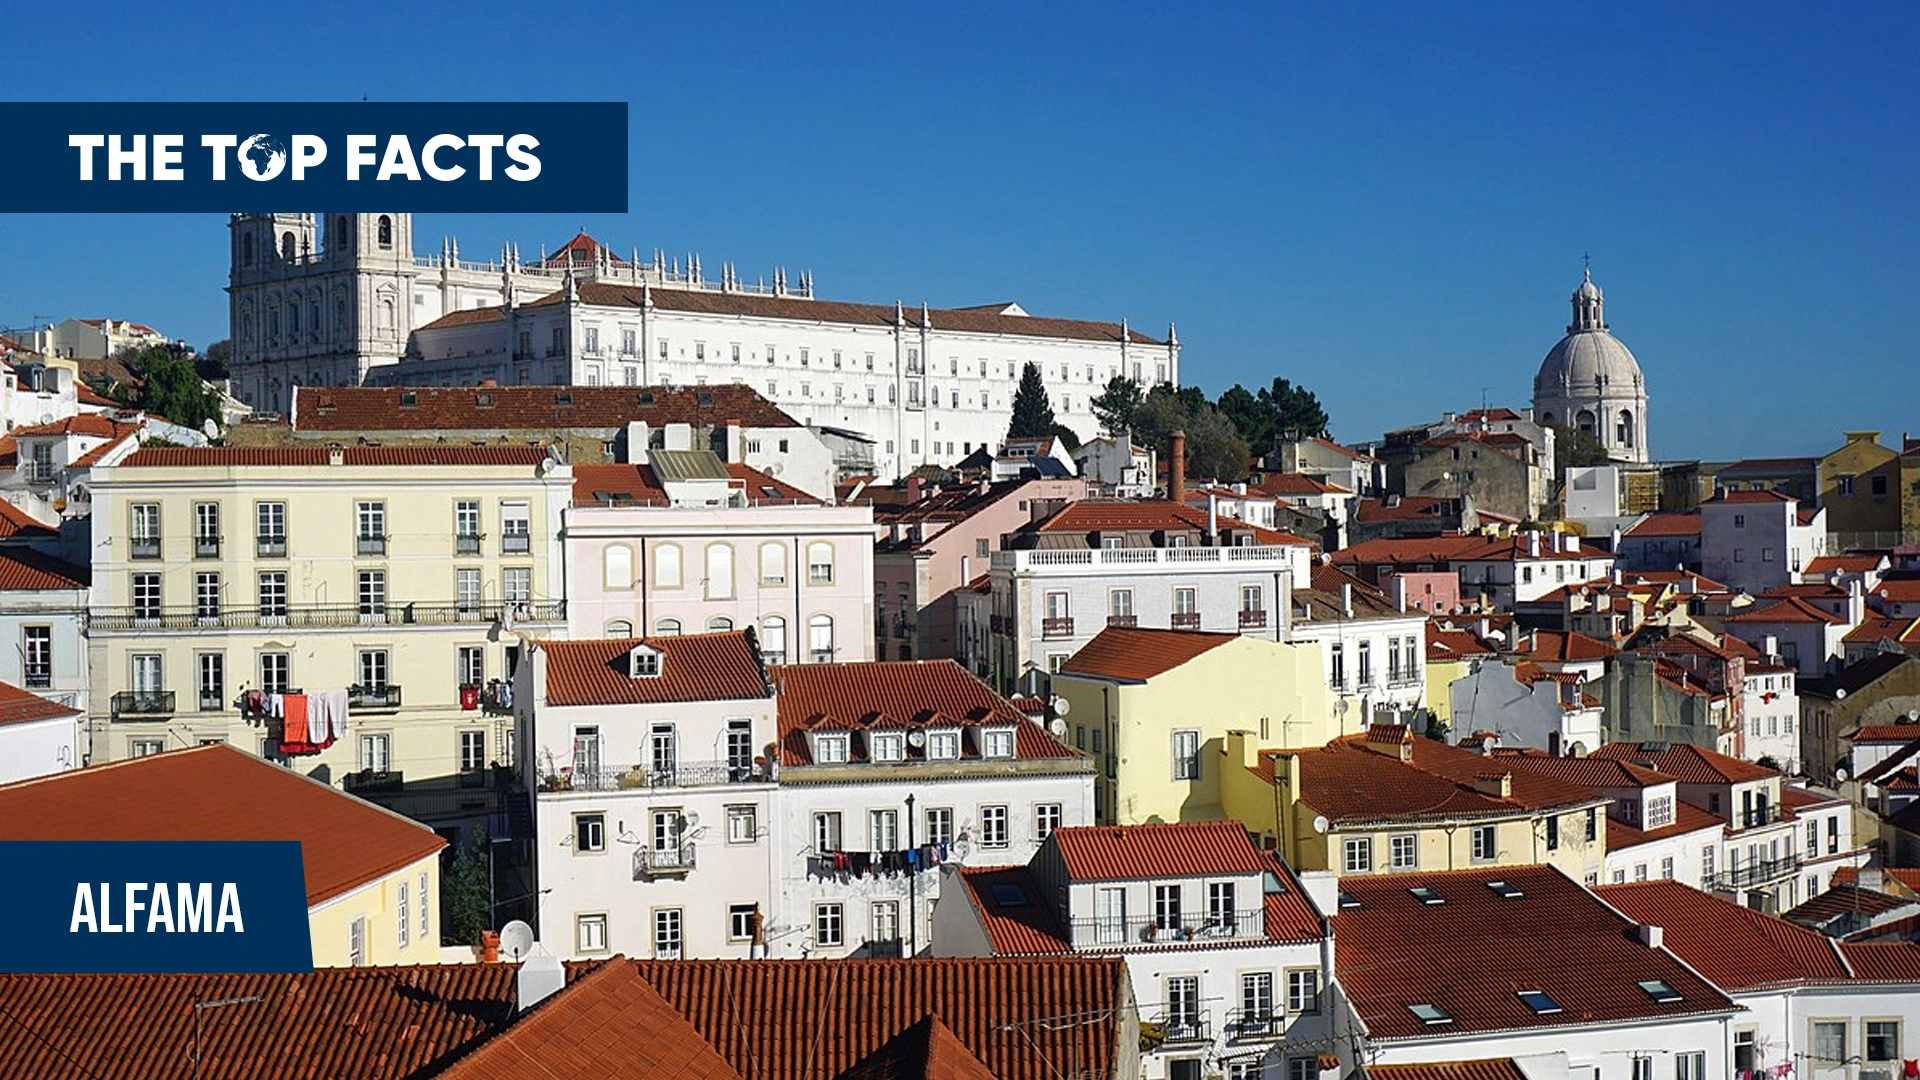 The historic district of Alfama, located in the heart of Lisbon - Alfama